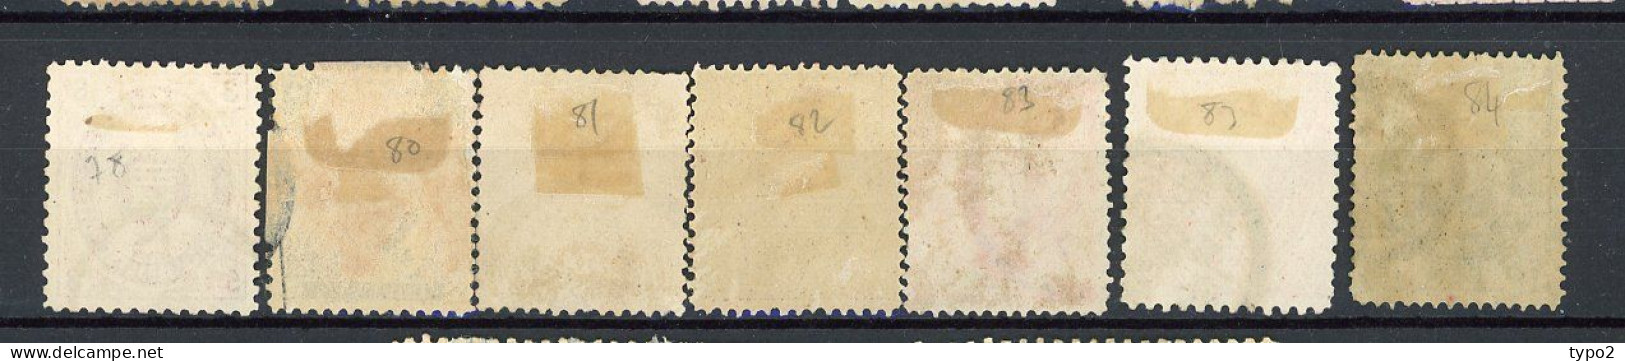 JAPON -  1888 Yv. N° 78, 80 à  84 (o) 3s, 8s à 25s Cote 19 Euro  BE  2 Scans - Used Stamps